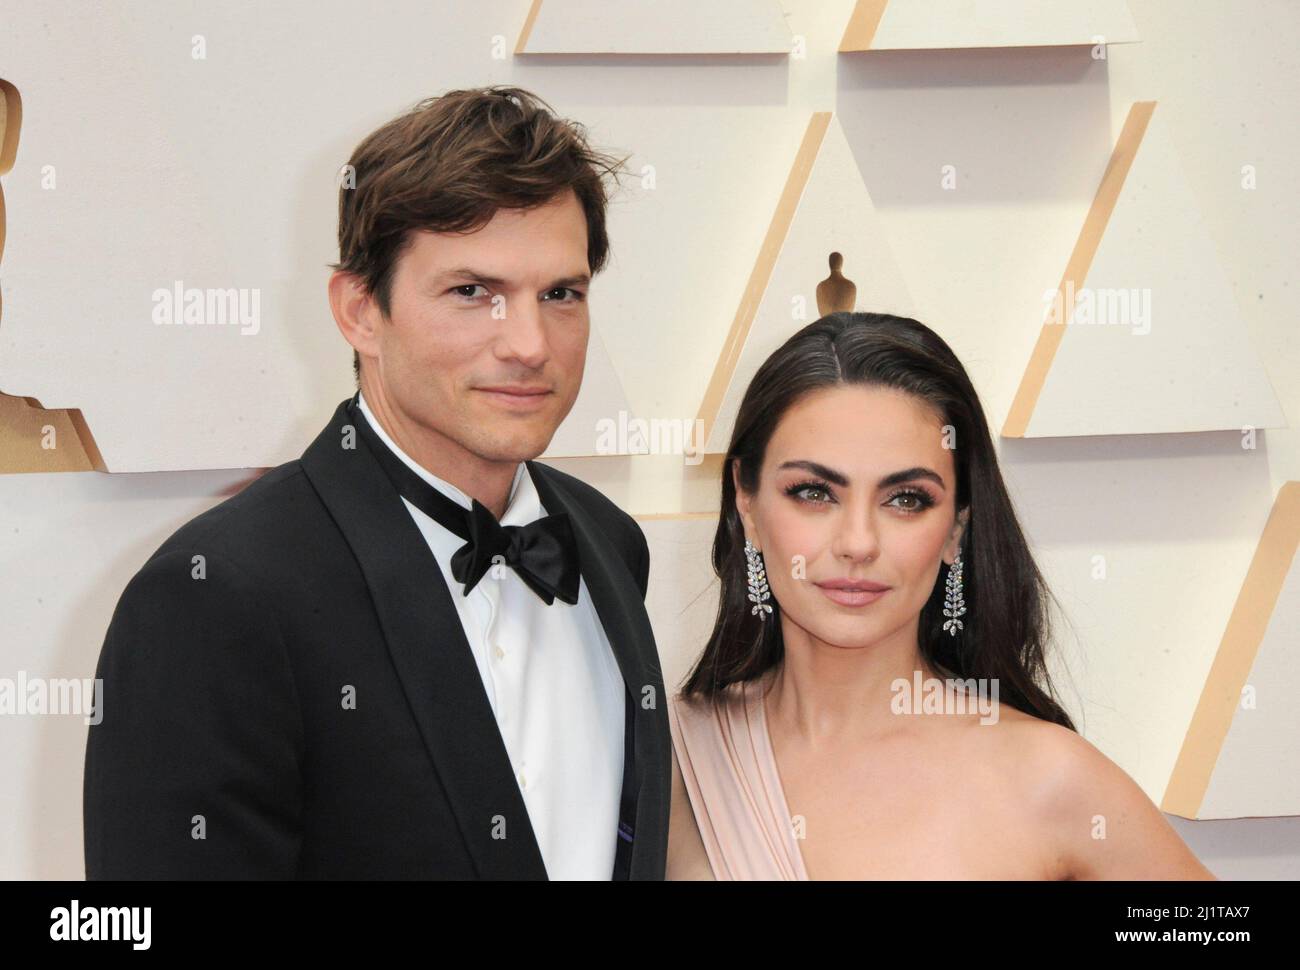 Los Angeles, CA. 27th Mar, 2022. Ashton Kutcher, Mila Kunis at arrivals for 94th Academy Awards - Arrivals 4, Dolby Theatre, Los Angeles, CA March 27, 2022. Credit: Elizabeth Goodenough/Everett Collection/Alamy Live News Stock Photo